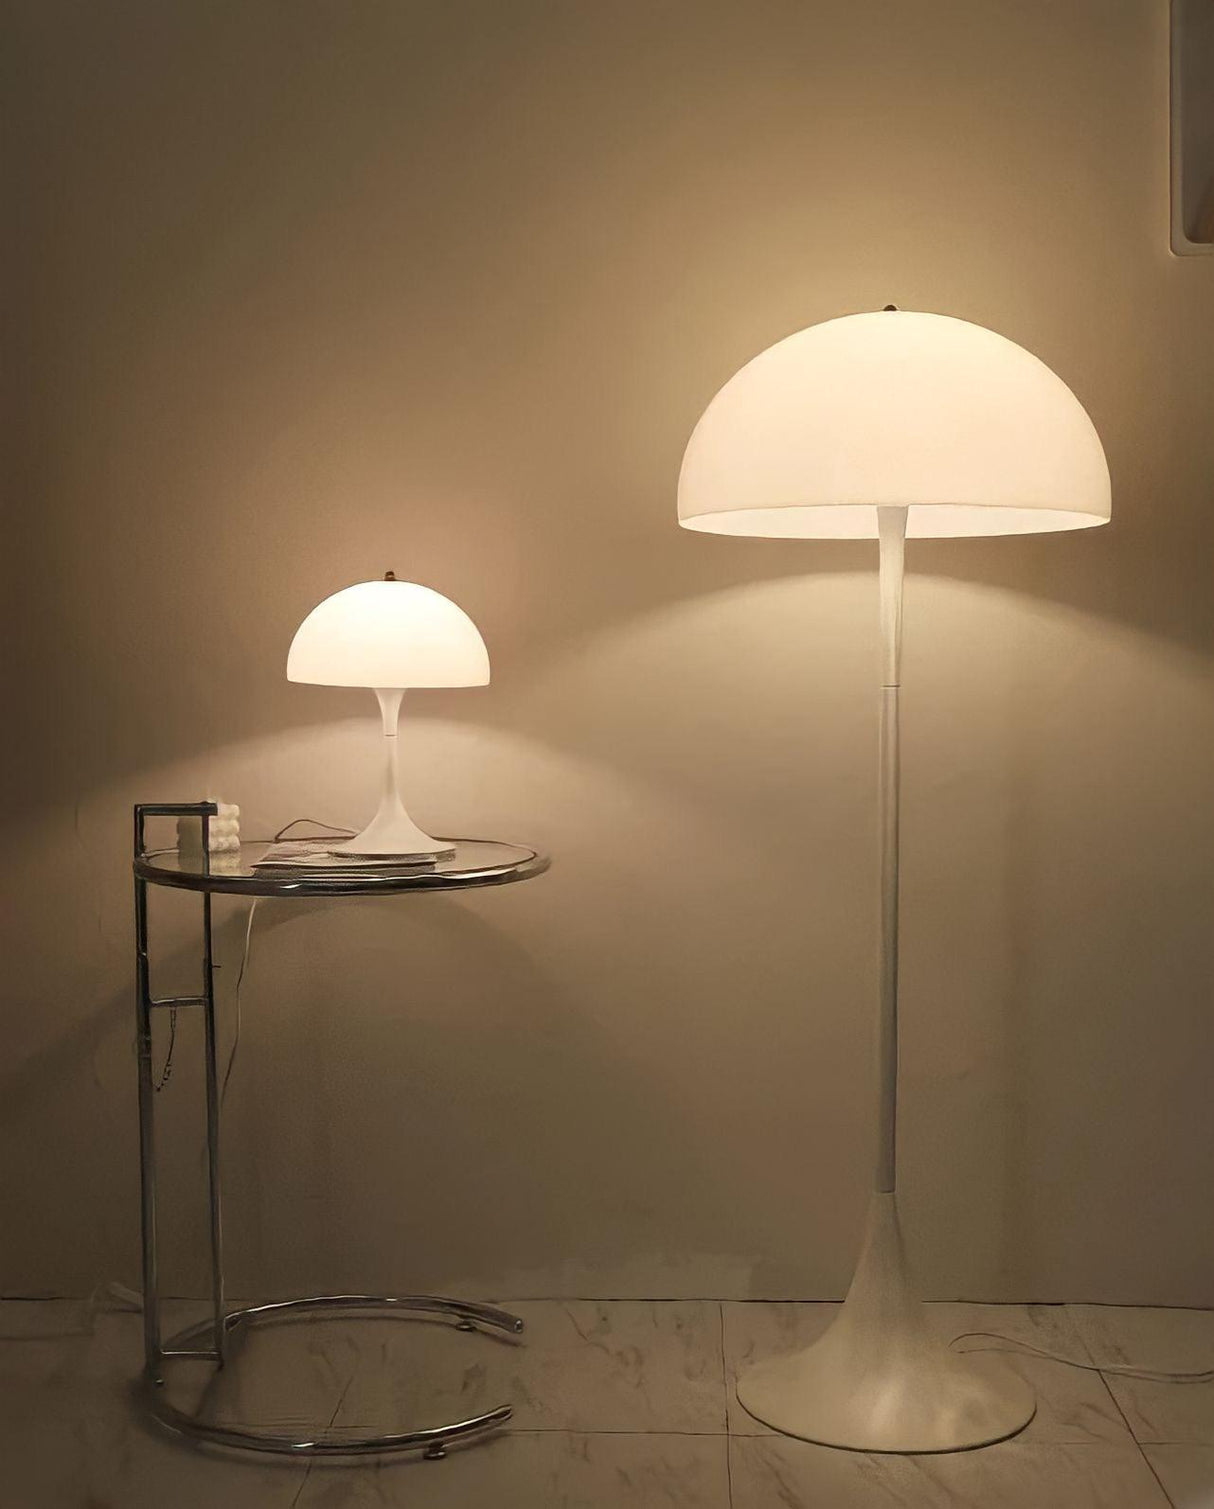 The Shroom Mushroom Lamp Collection - BLISOME